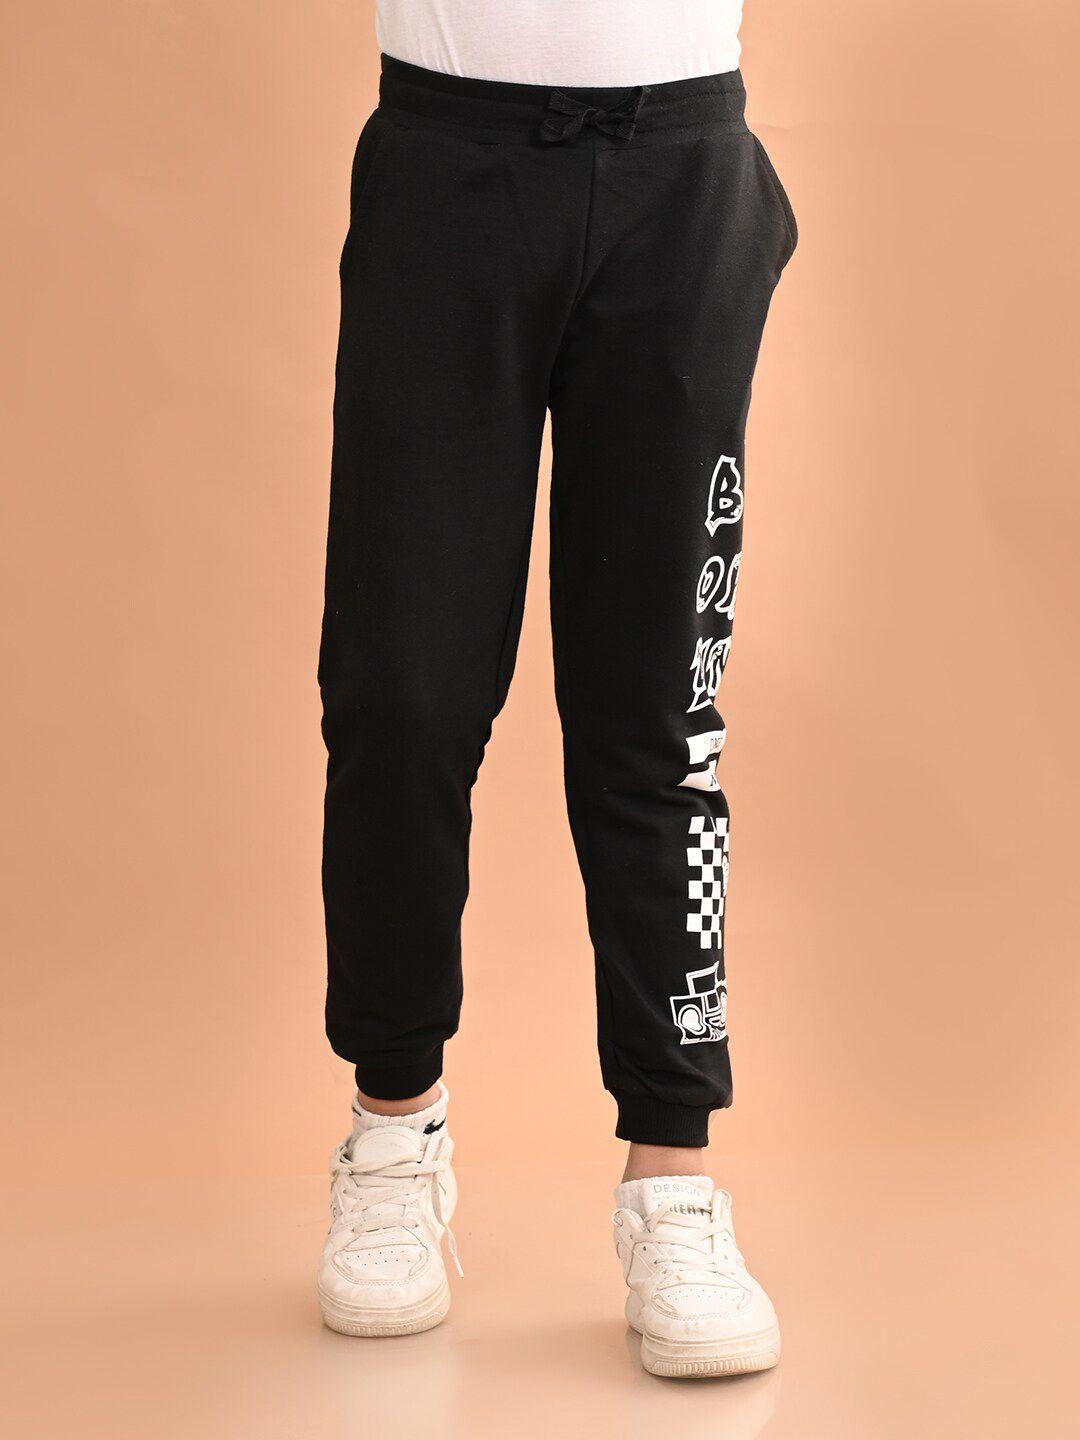 lilpicks boys abstract printed mid-rise cotton joggers